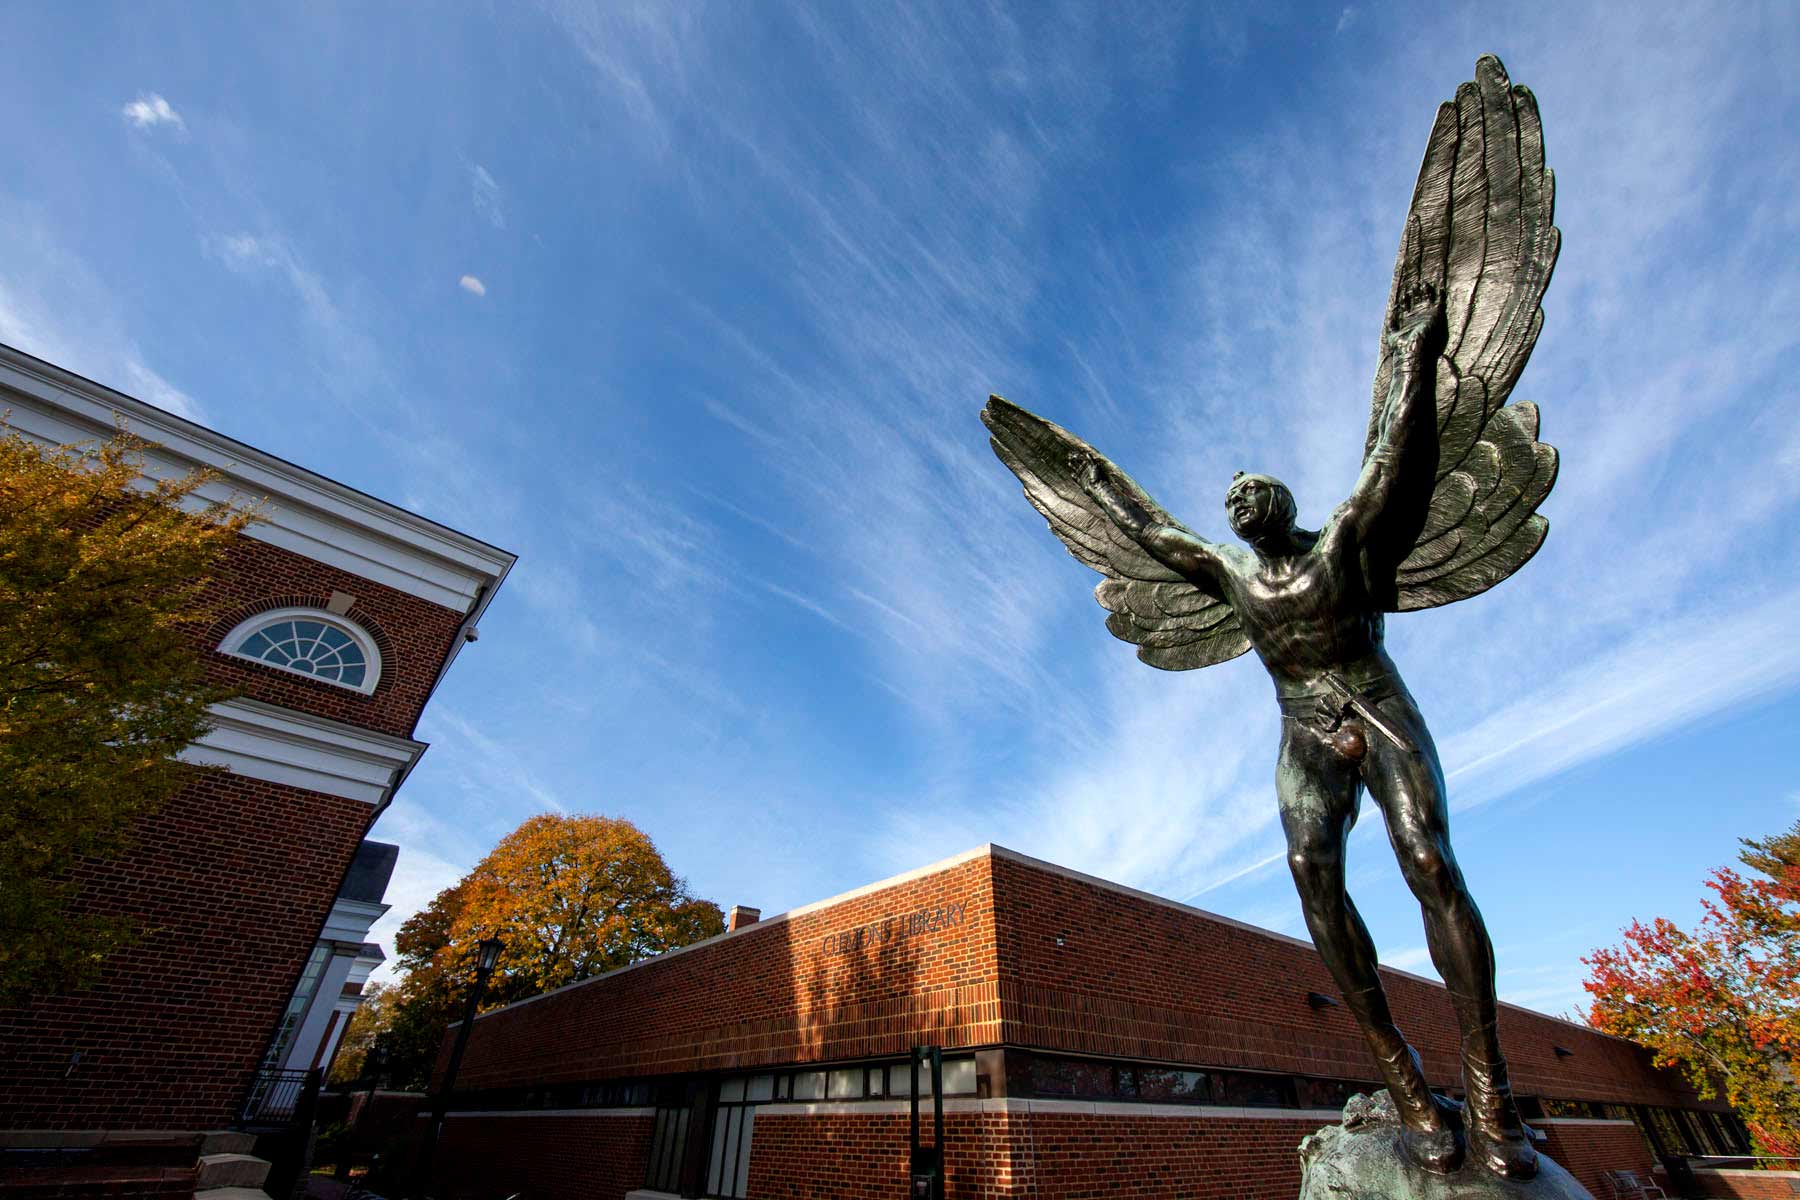 “The Aviator,” which currently resides in the plaza of Clemons Library, is a tribute to James McConnell, a pilot shot down over France in World War I. (Photo by Dan Addison, University Communications)